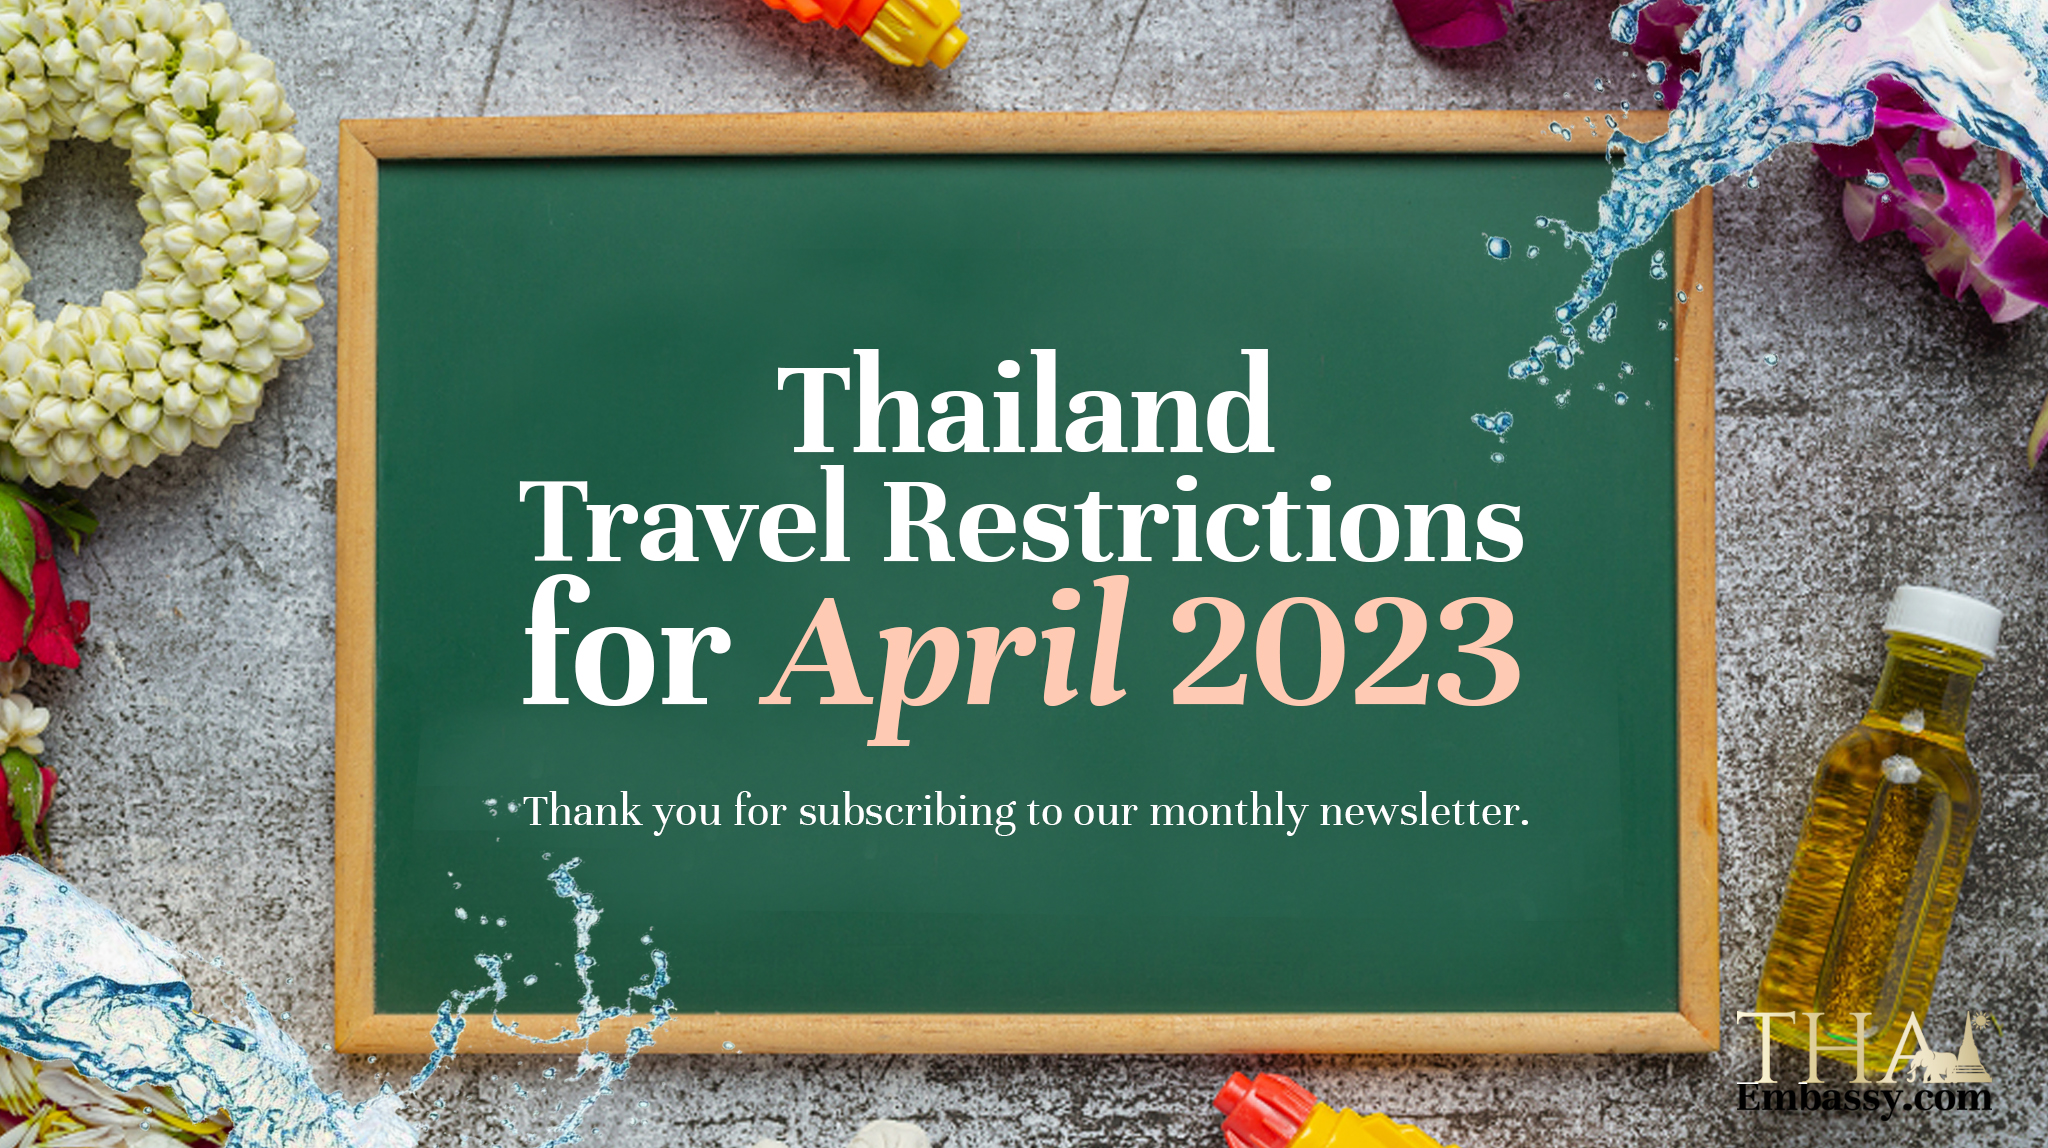 travel to thailand covid restrictions 2023